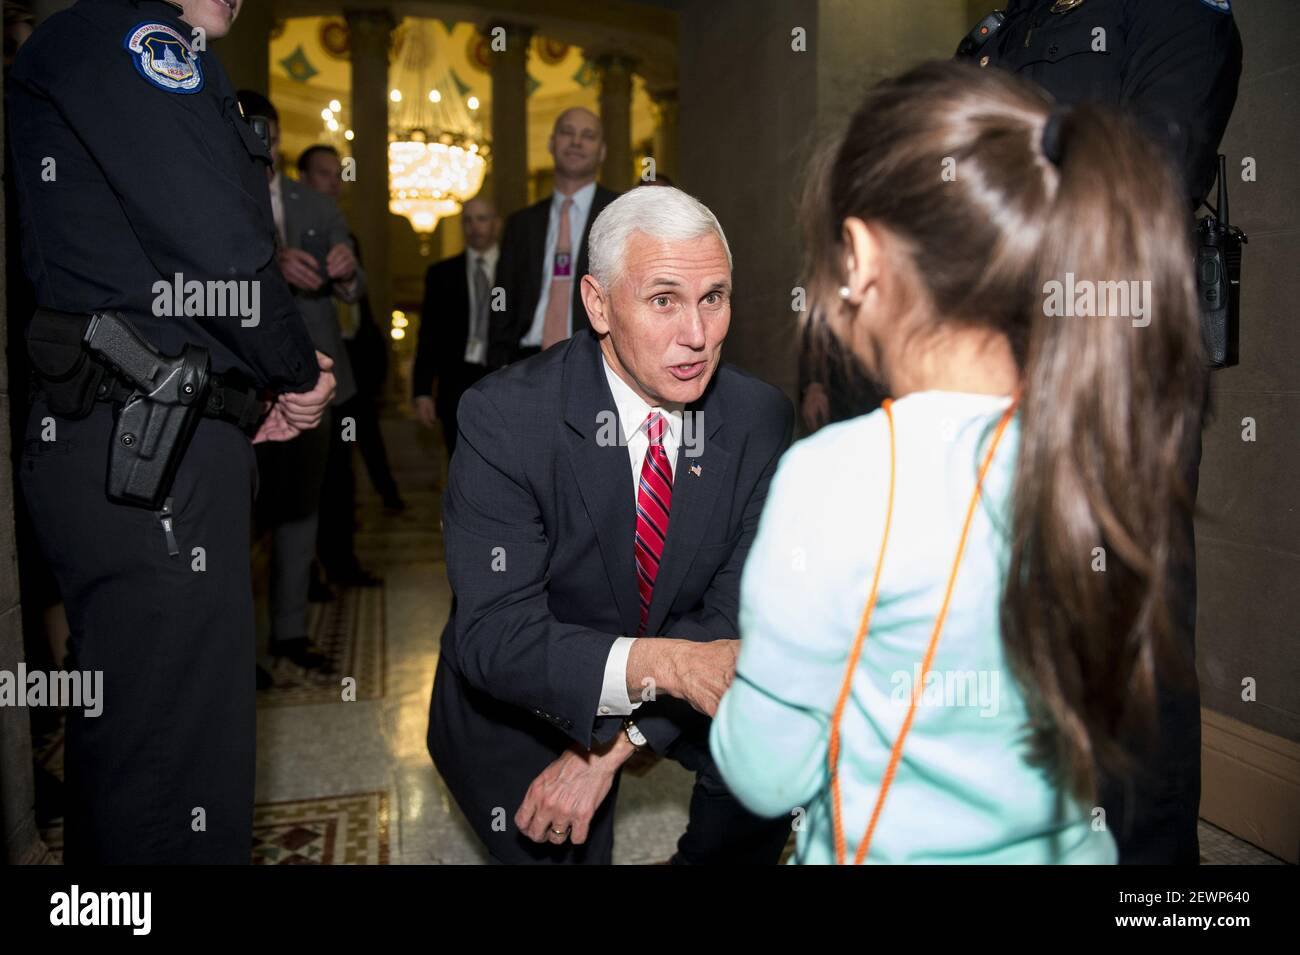 UNITED STATES - DECEMBER 6: Vice President-elect Mike Pence stops to talk with 4 year old tourist Victoria Cruz, of Orlando, Fla., as he leaves the Senate Republicans weekly policy lunch in the Capitol on Tuesday, Dec. 6, 2016. Victoria and her mother Elena were in the Rotunda on a tour of the Capitol when the Vice President-elect stopped to greet them. (Photo By Bill Clark/CQ Roll Call) *** Please Use Credit from Credit Field *** Stock Photo